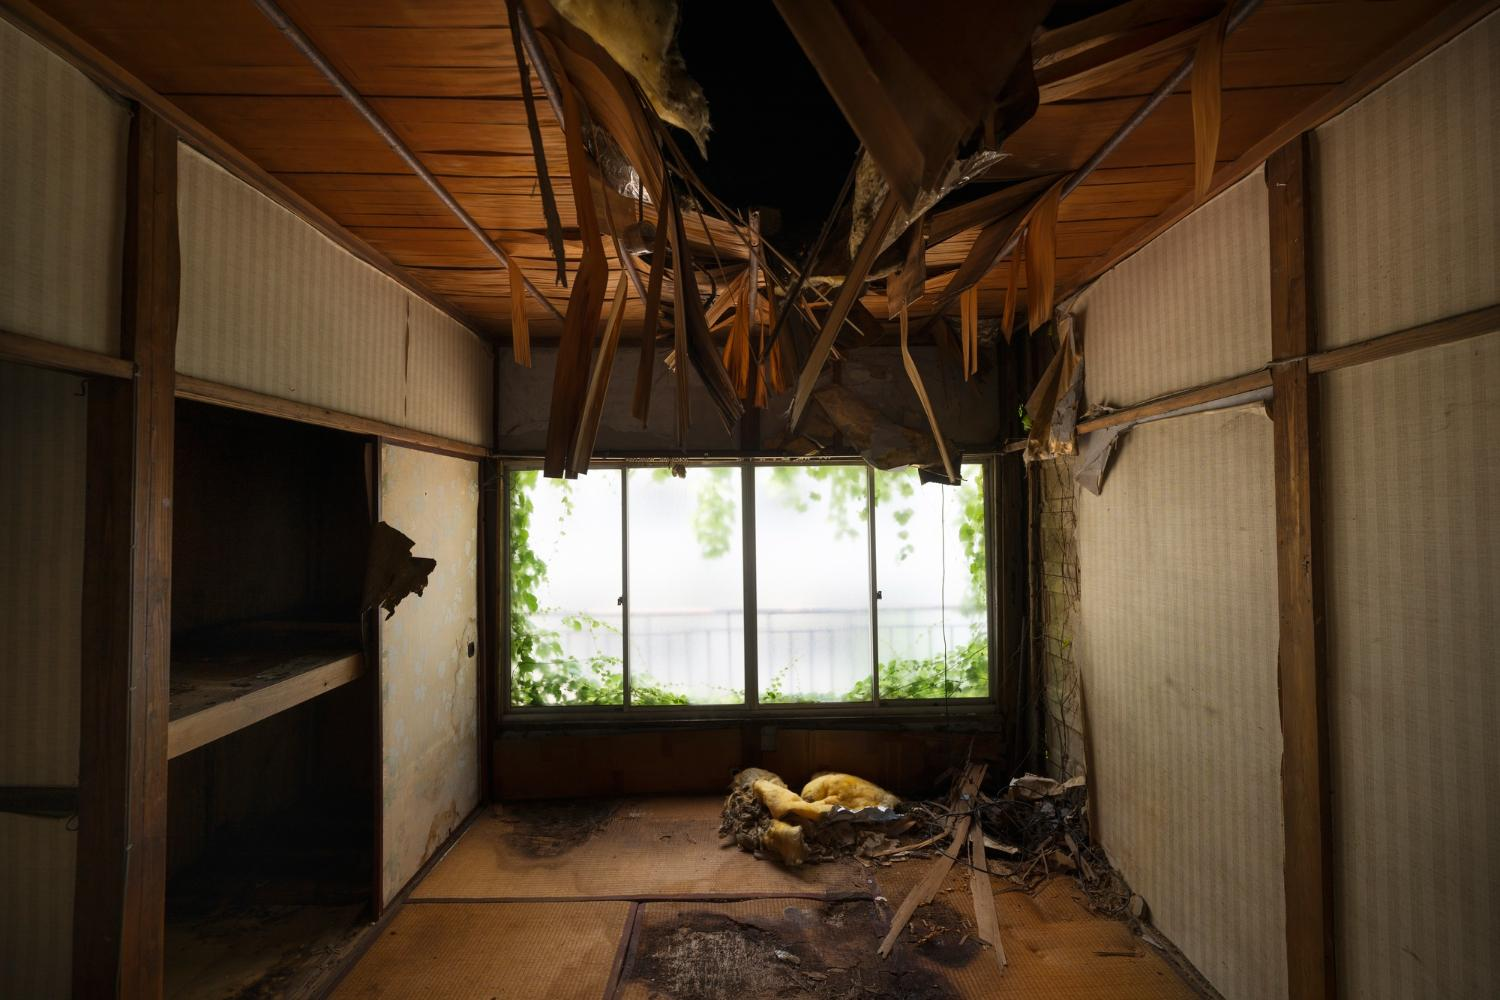 How to Handle Water Damage After a Storm